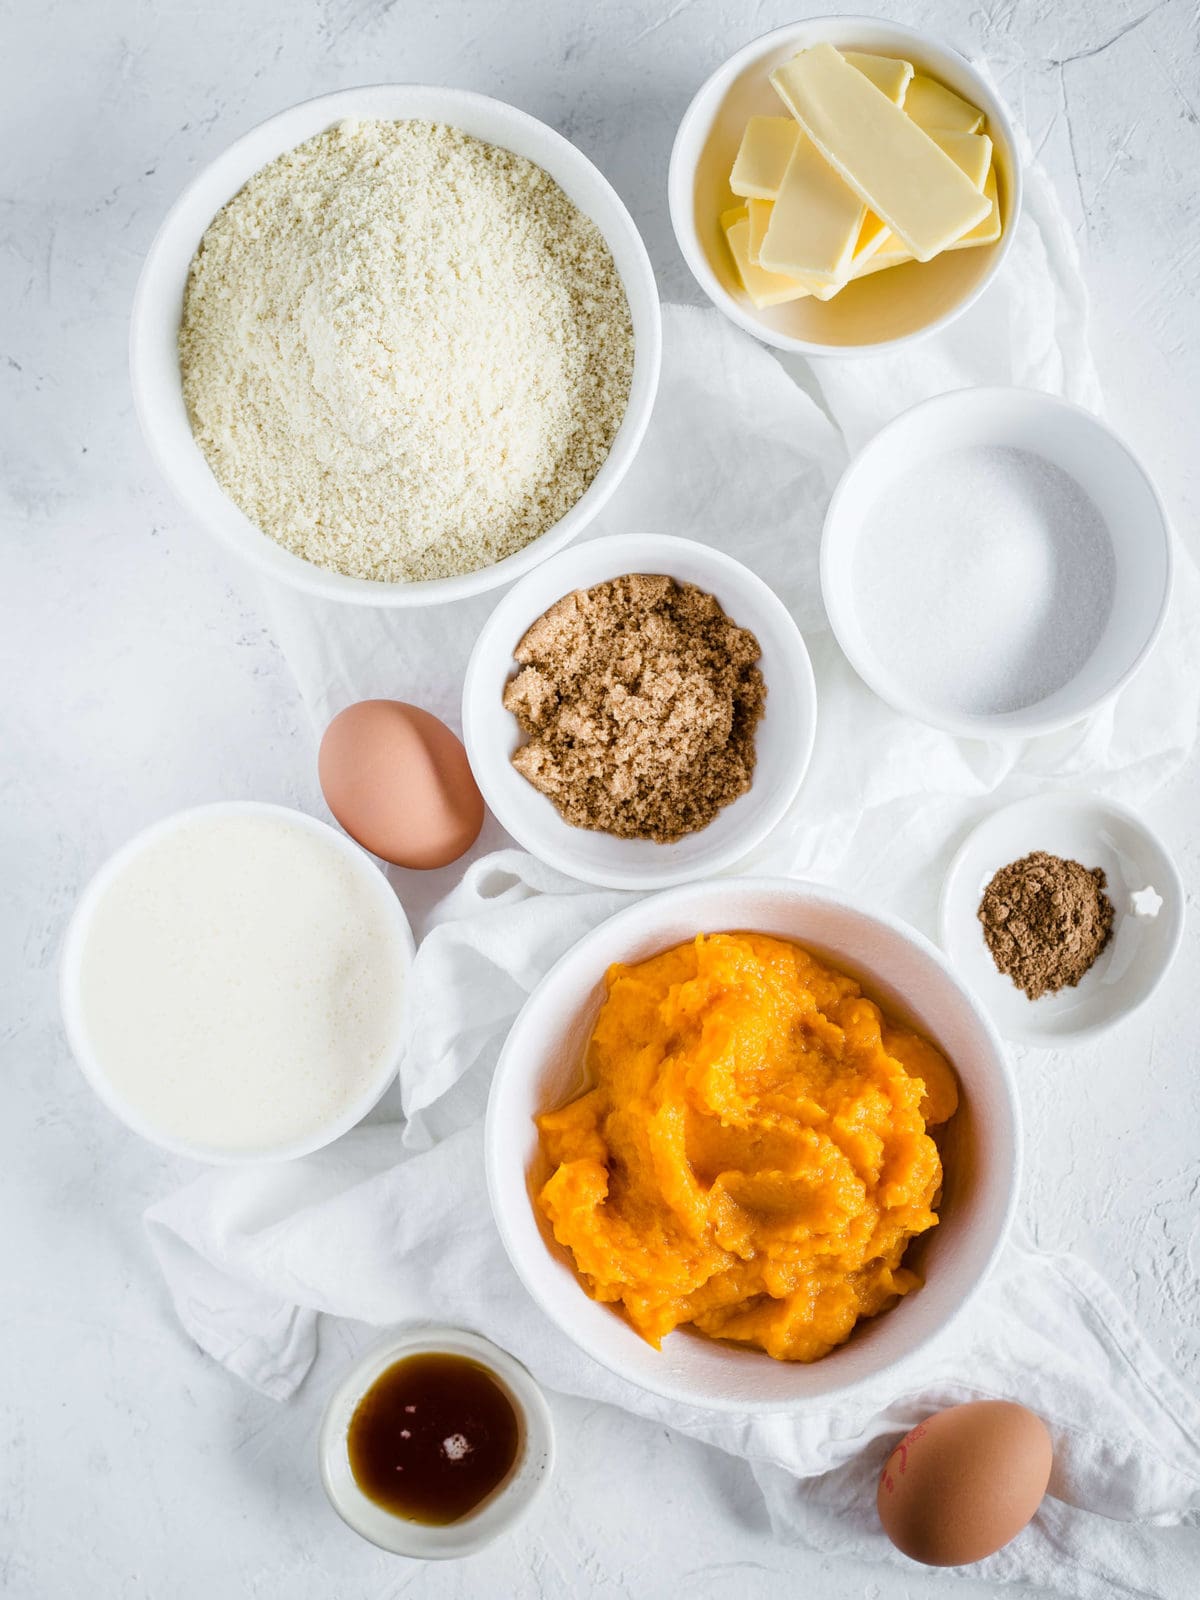 Ingredients laid out in individual bowls to make a low carb pumpkin pie - almond flour, eggs, butter, sweeteners, pumpkin pie spice, pumpkin puree and vanilla.